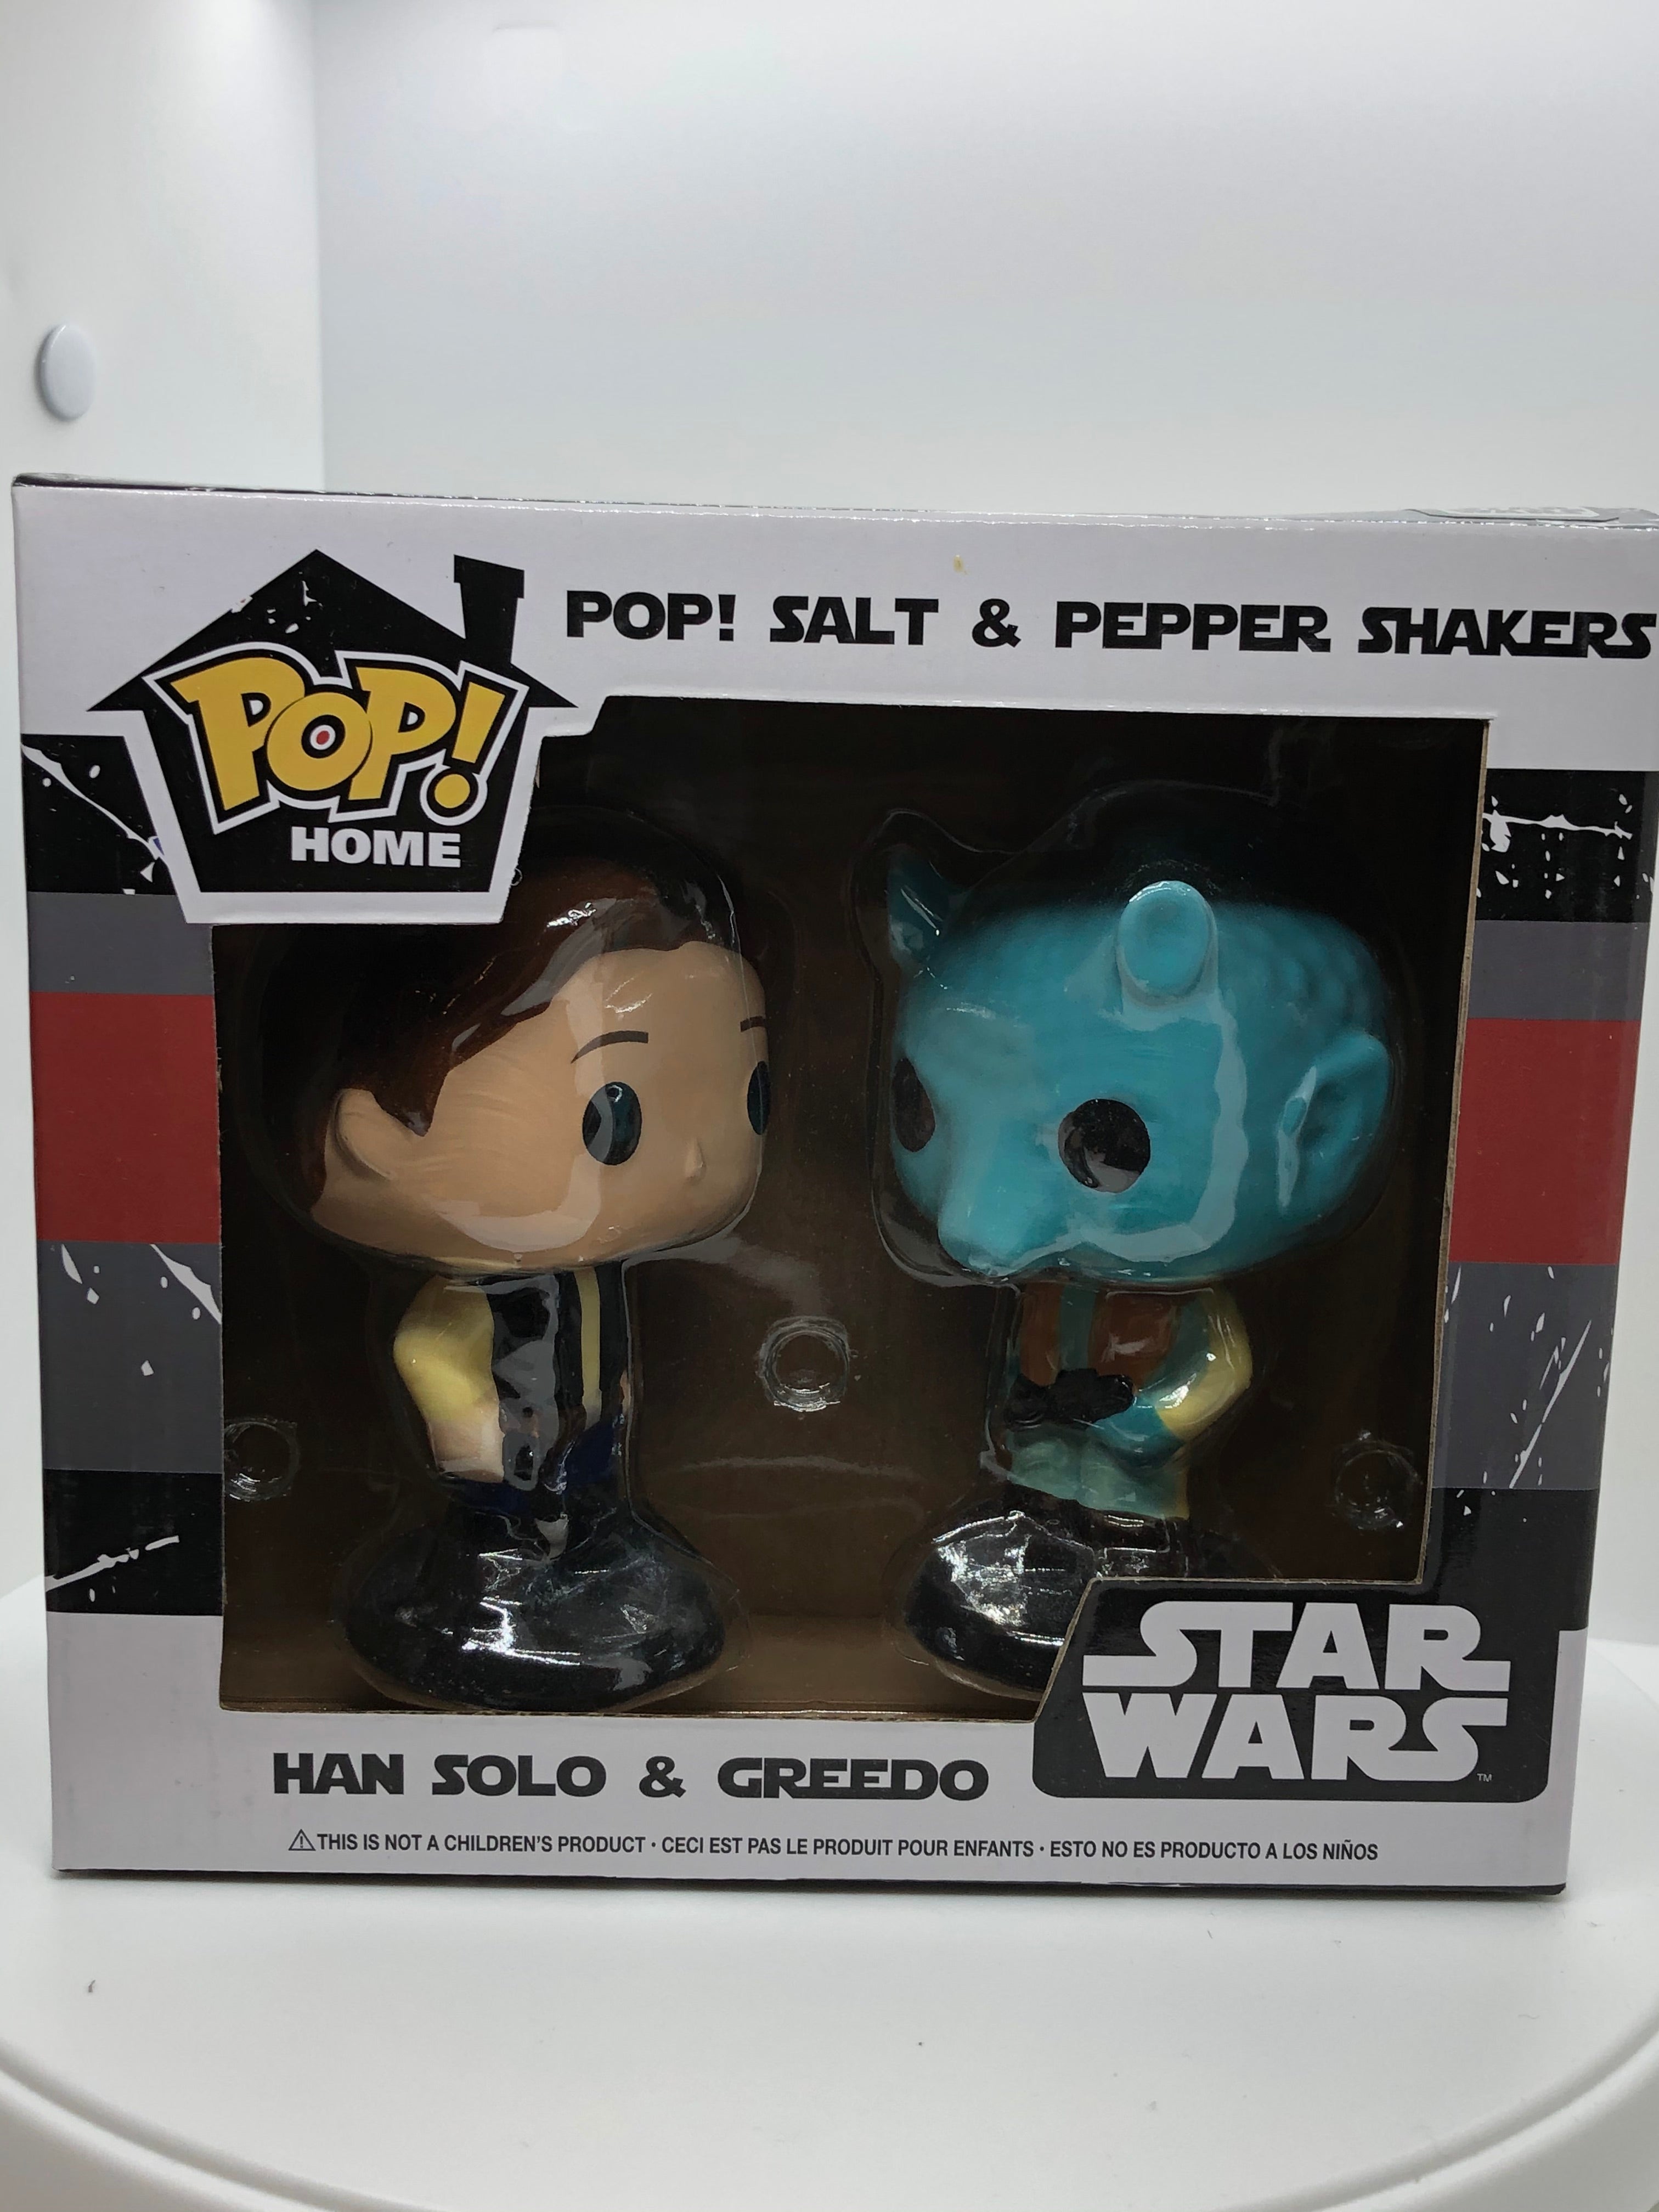 Funko Pop! Star Wars Han Solo and Greedo Salt and Pepper Shakers